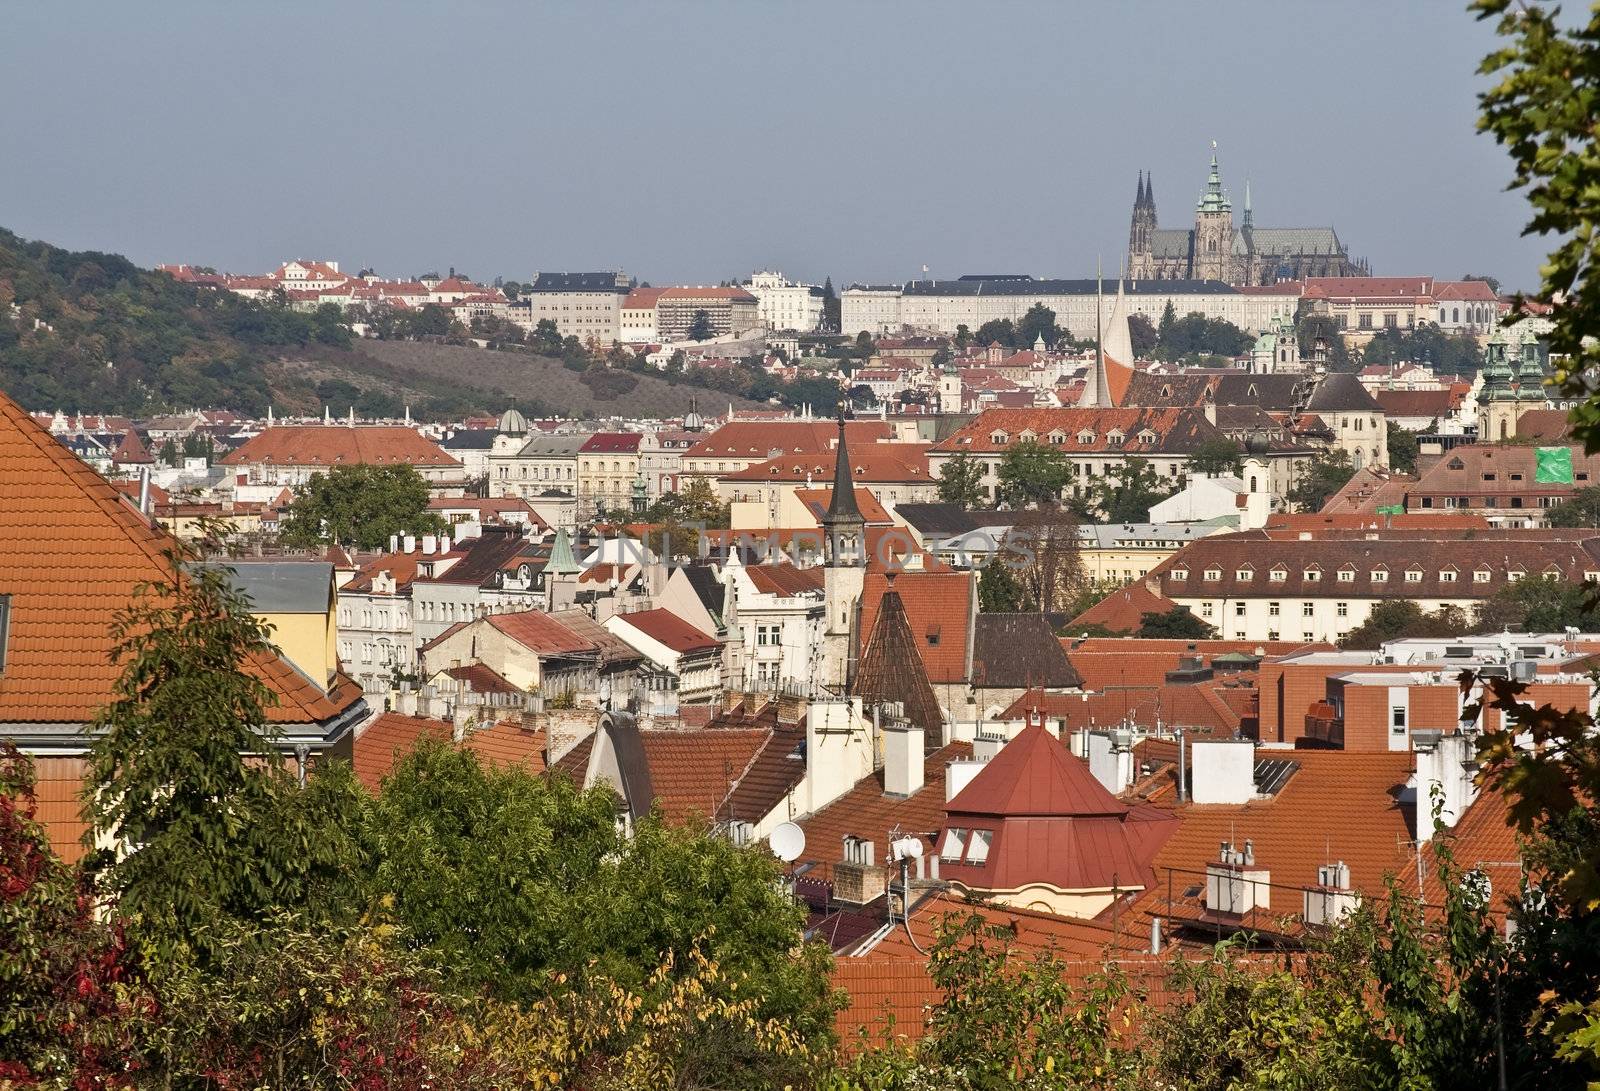 	
view of Prague by tmirlin